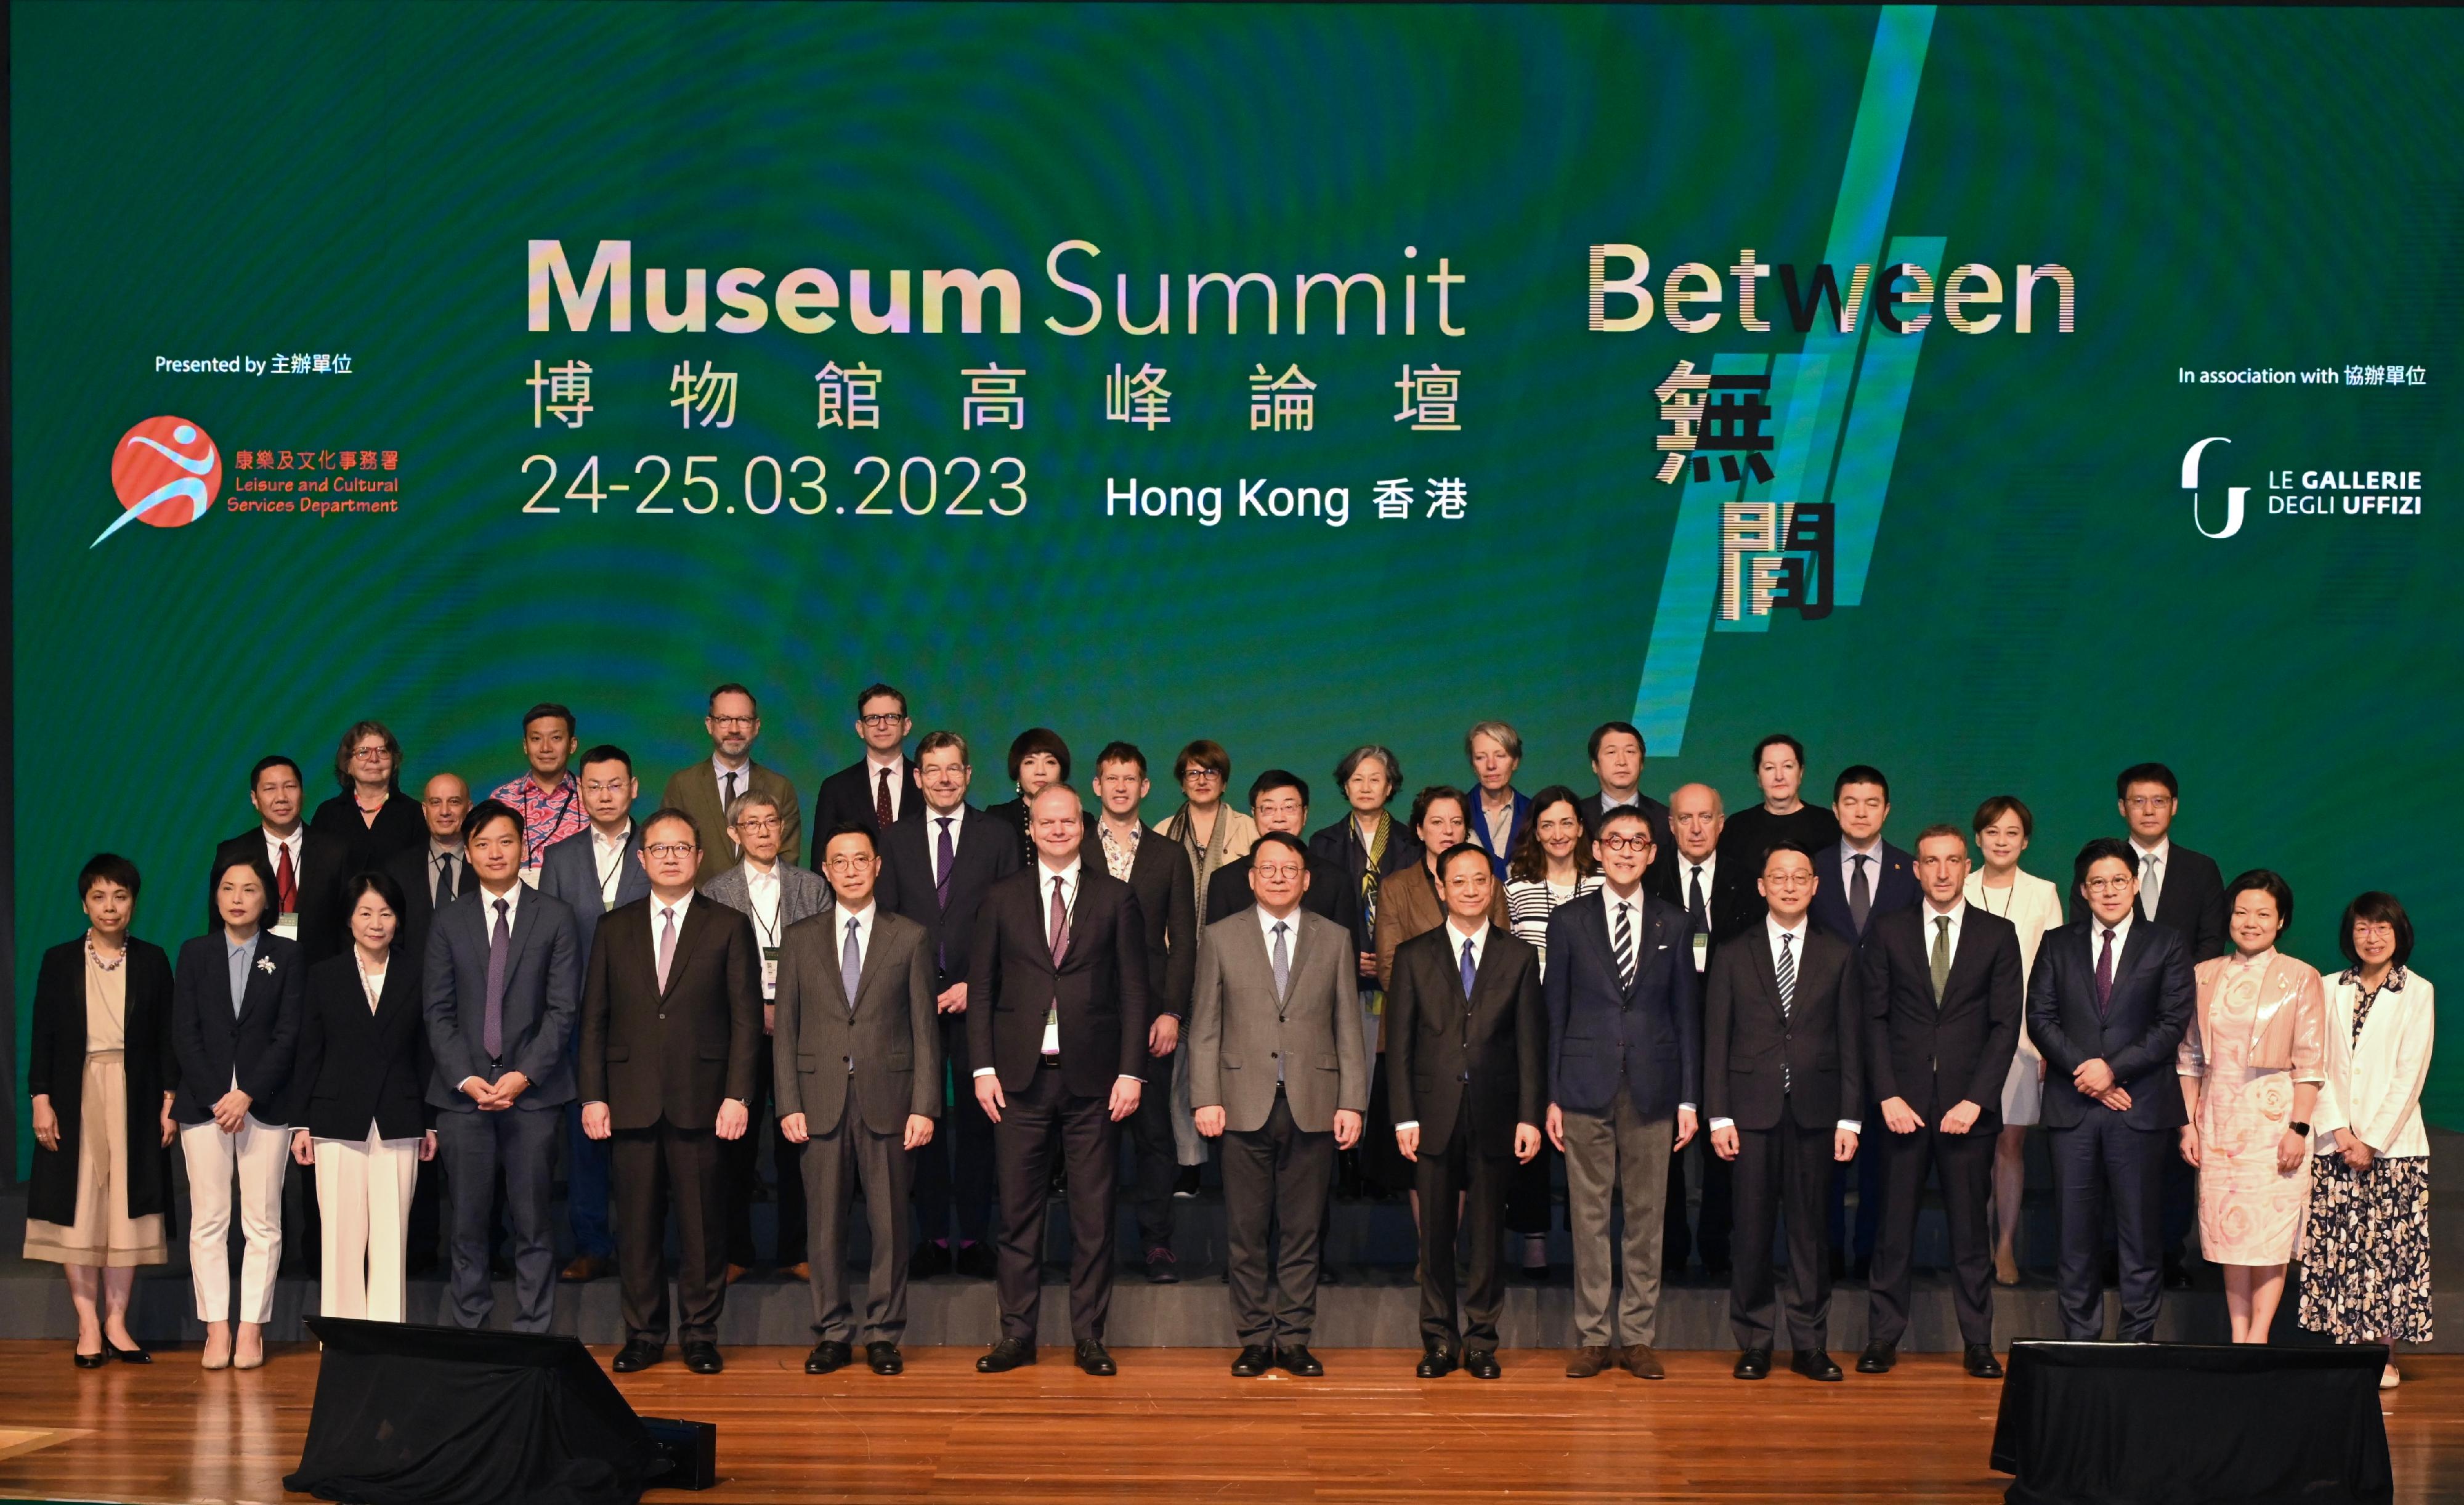 The opening ceremony of the Museum Summit 2023 was held today (March 24) at the Hong Kong Convention and Exhibition Centre. Photo shows the Chief Secretary for Administration, Mr Chan Kwok-ki (first row, eighth left); the Director of Gallerie degli Uffizi (Italy), Dr Eike Schmidt (first row, seventh left); Deputy Administrator of National Cultural Heritage Administration (China) Mr Gu Yucai (first row, seventh right); the Secretary for Culture, Sports and Tourism, Mr Kevin Yeung (first row, sixth left); the Chairman of the Museum Advisory Committee, Mr Douglas So (first row, sixth right); the Permanent Secretary for Culture, Sports and Tourism, Mr Joe Wong (first row, fifth left); the Director of Leisure and Cultural Services, Mr Vincent Liu (first row, fifth right), and other guests at the ceremony.